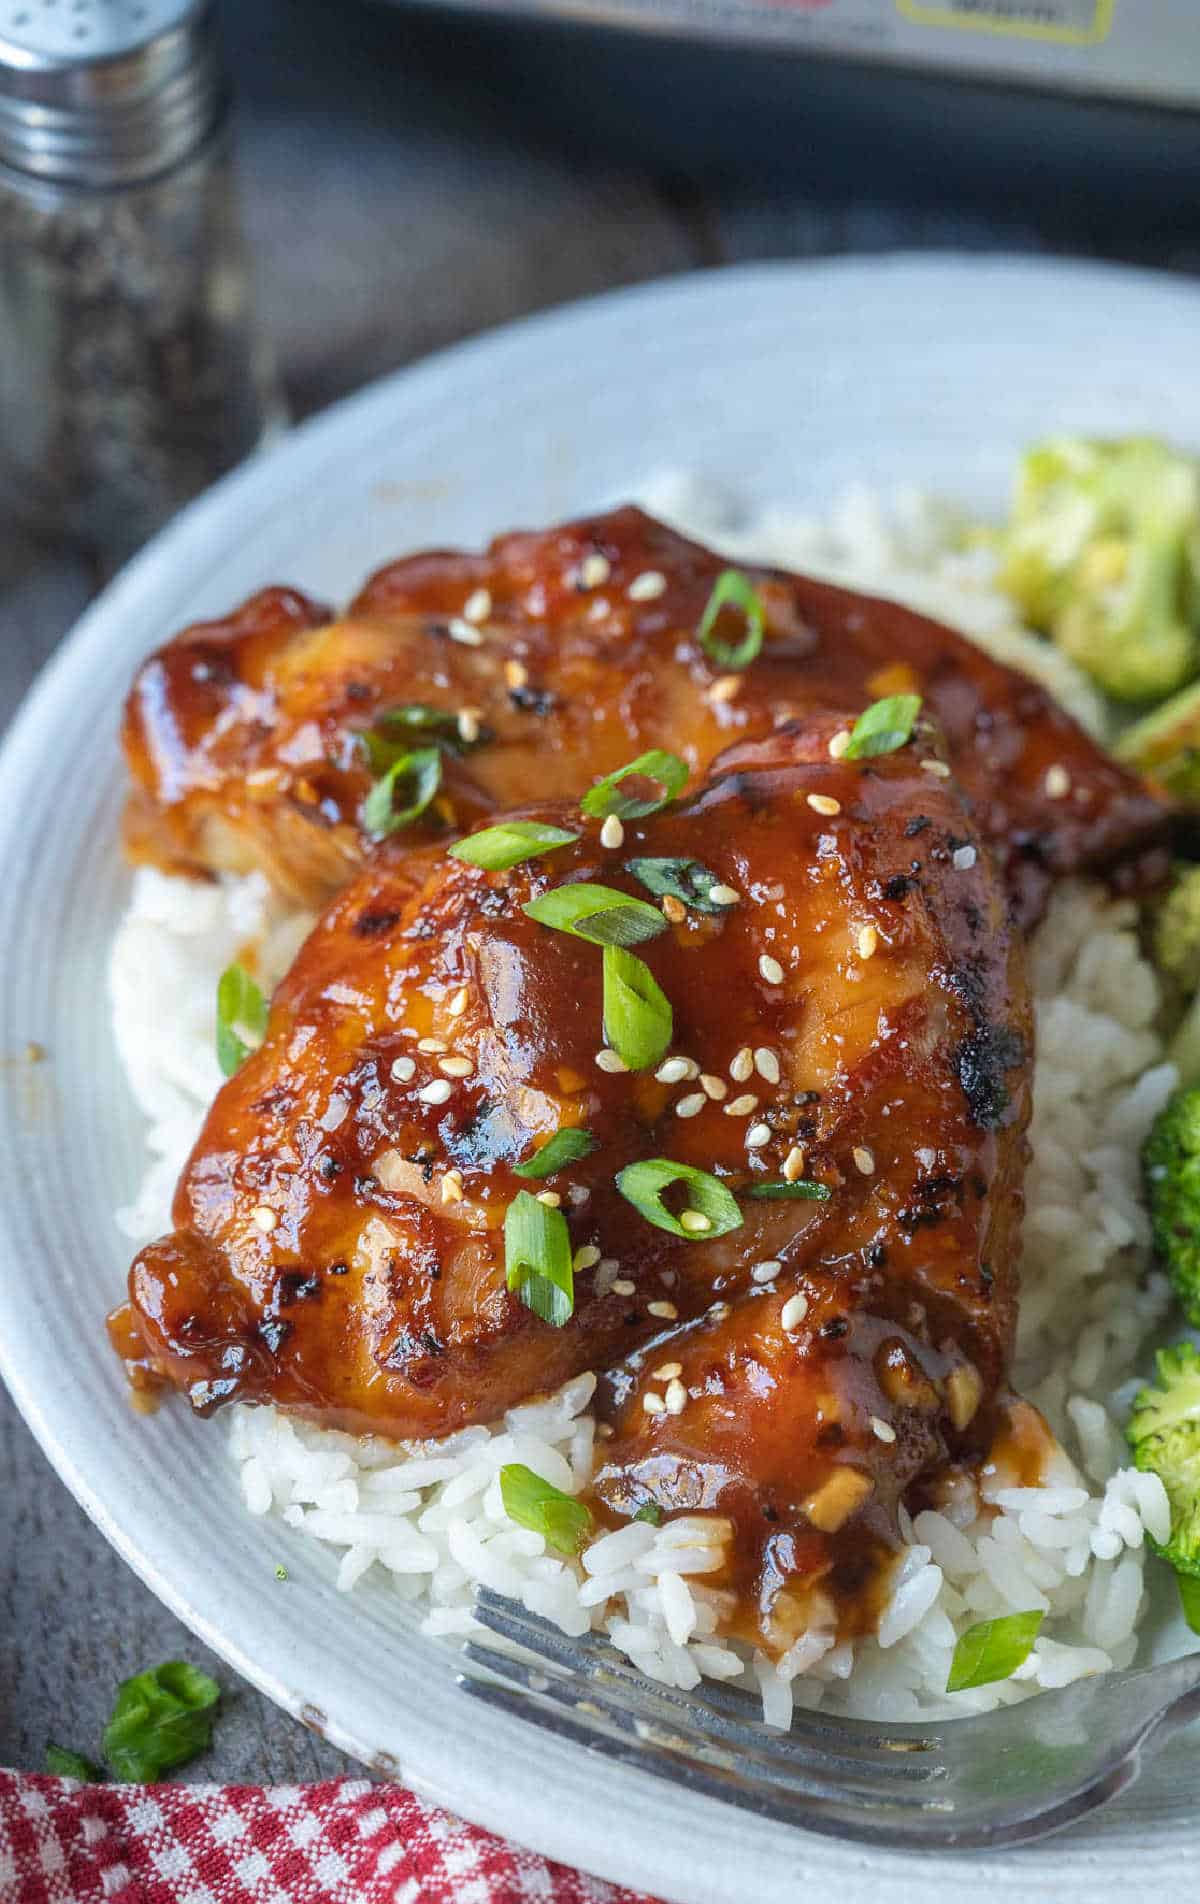 Cooked chicken on a bed of white rice.